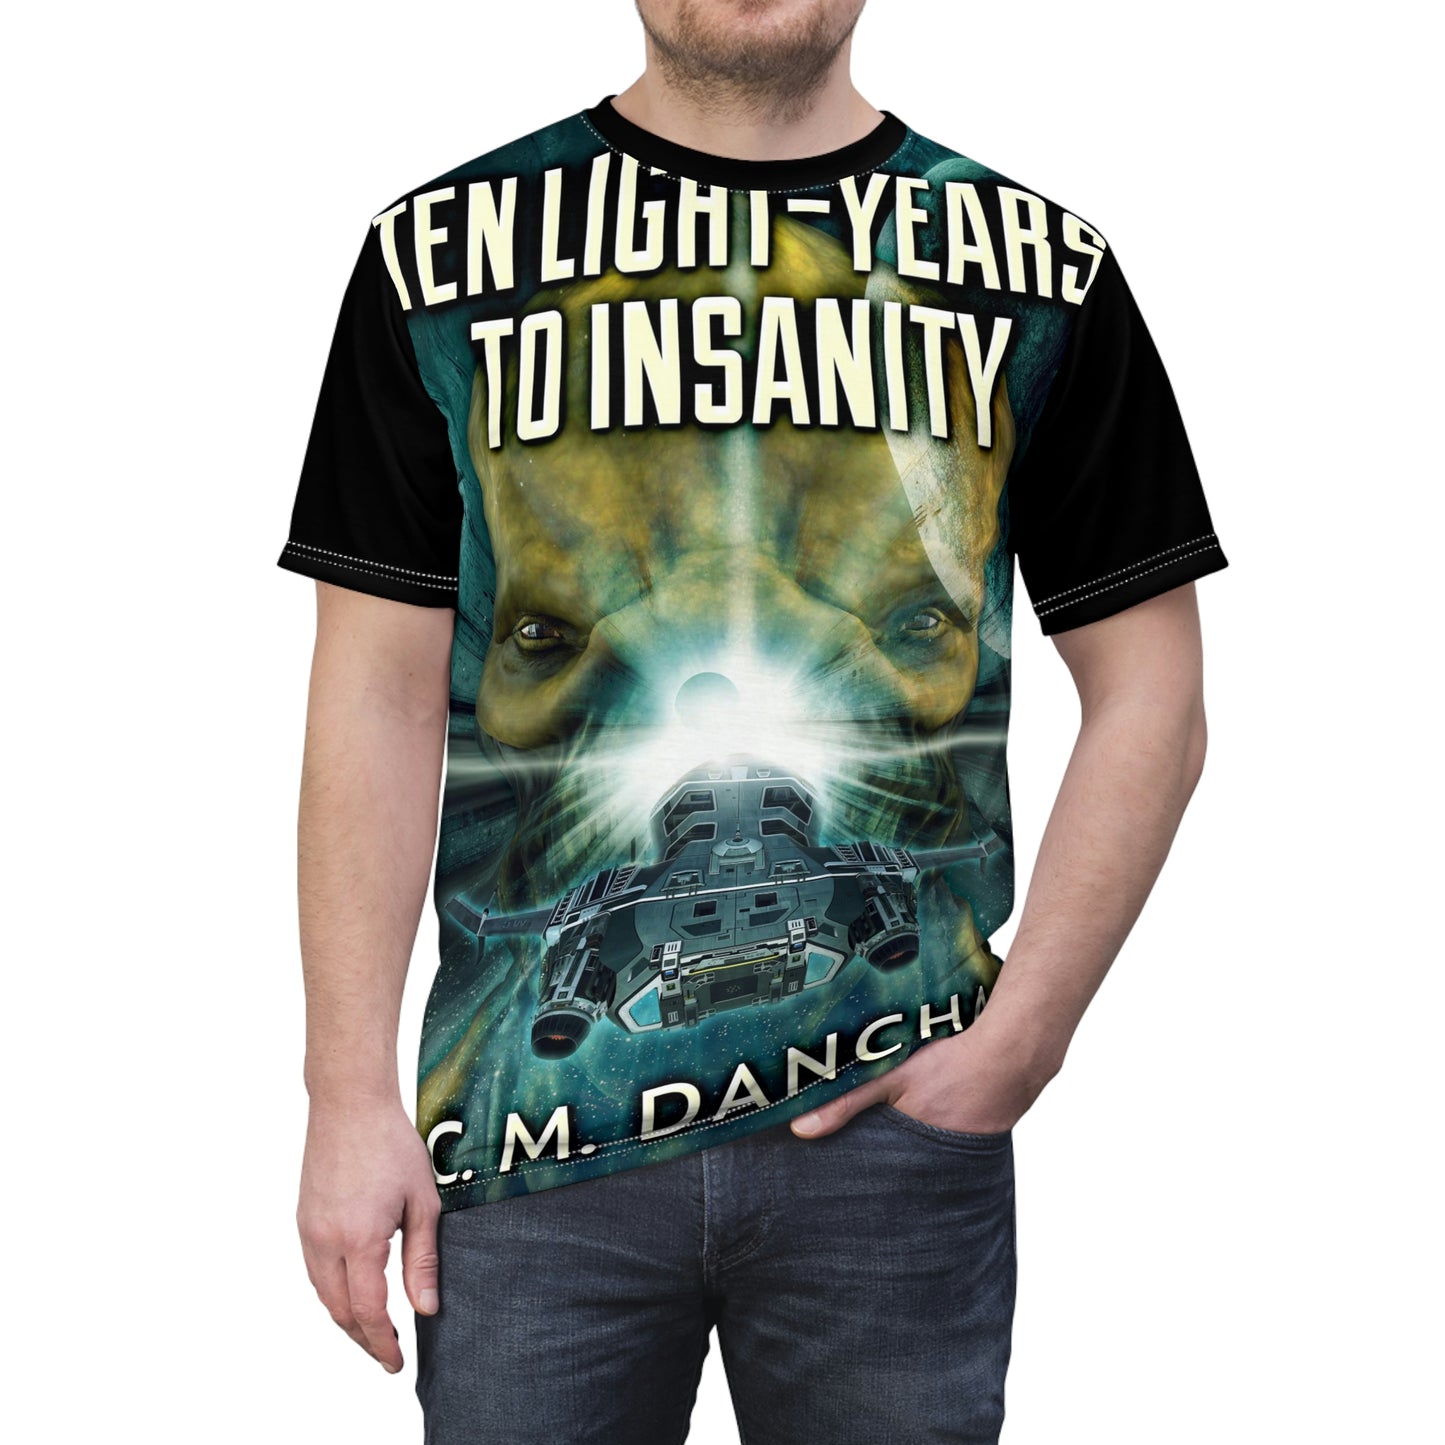 Ten Light-Years To Insanity - Unisex All-Over Print Cut & Sew T-Shirt